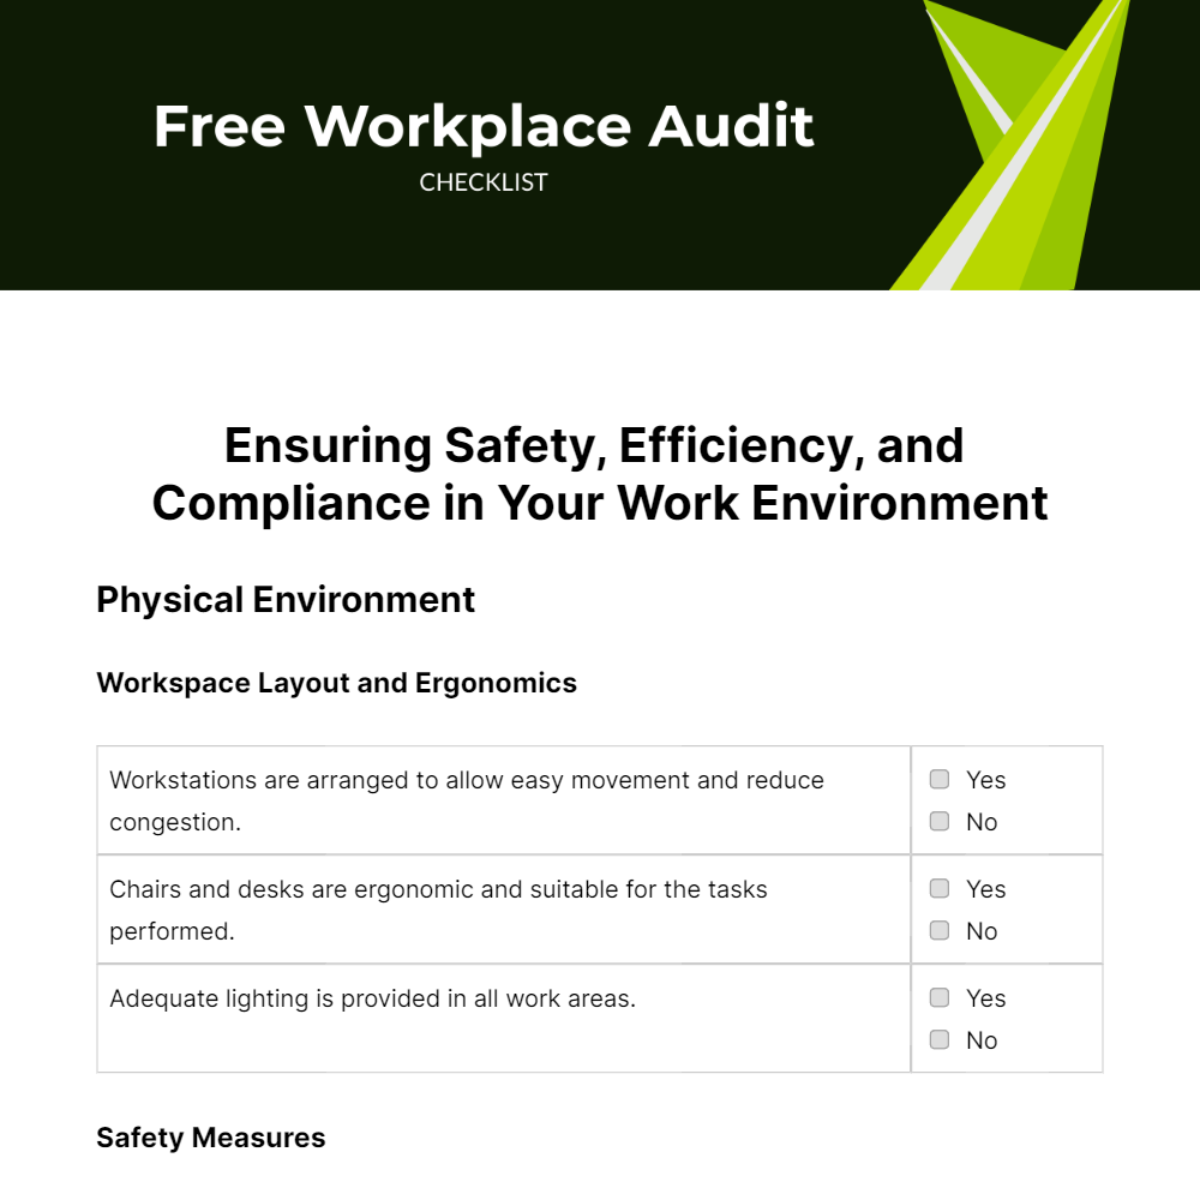 Free Workplace Audit Checklist Template